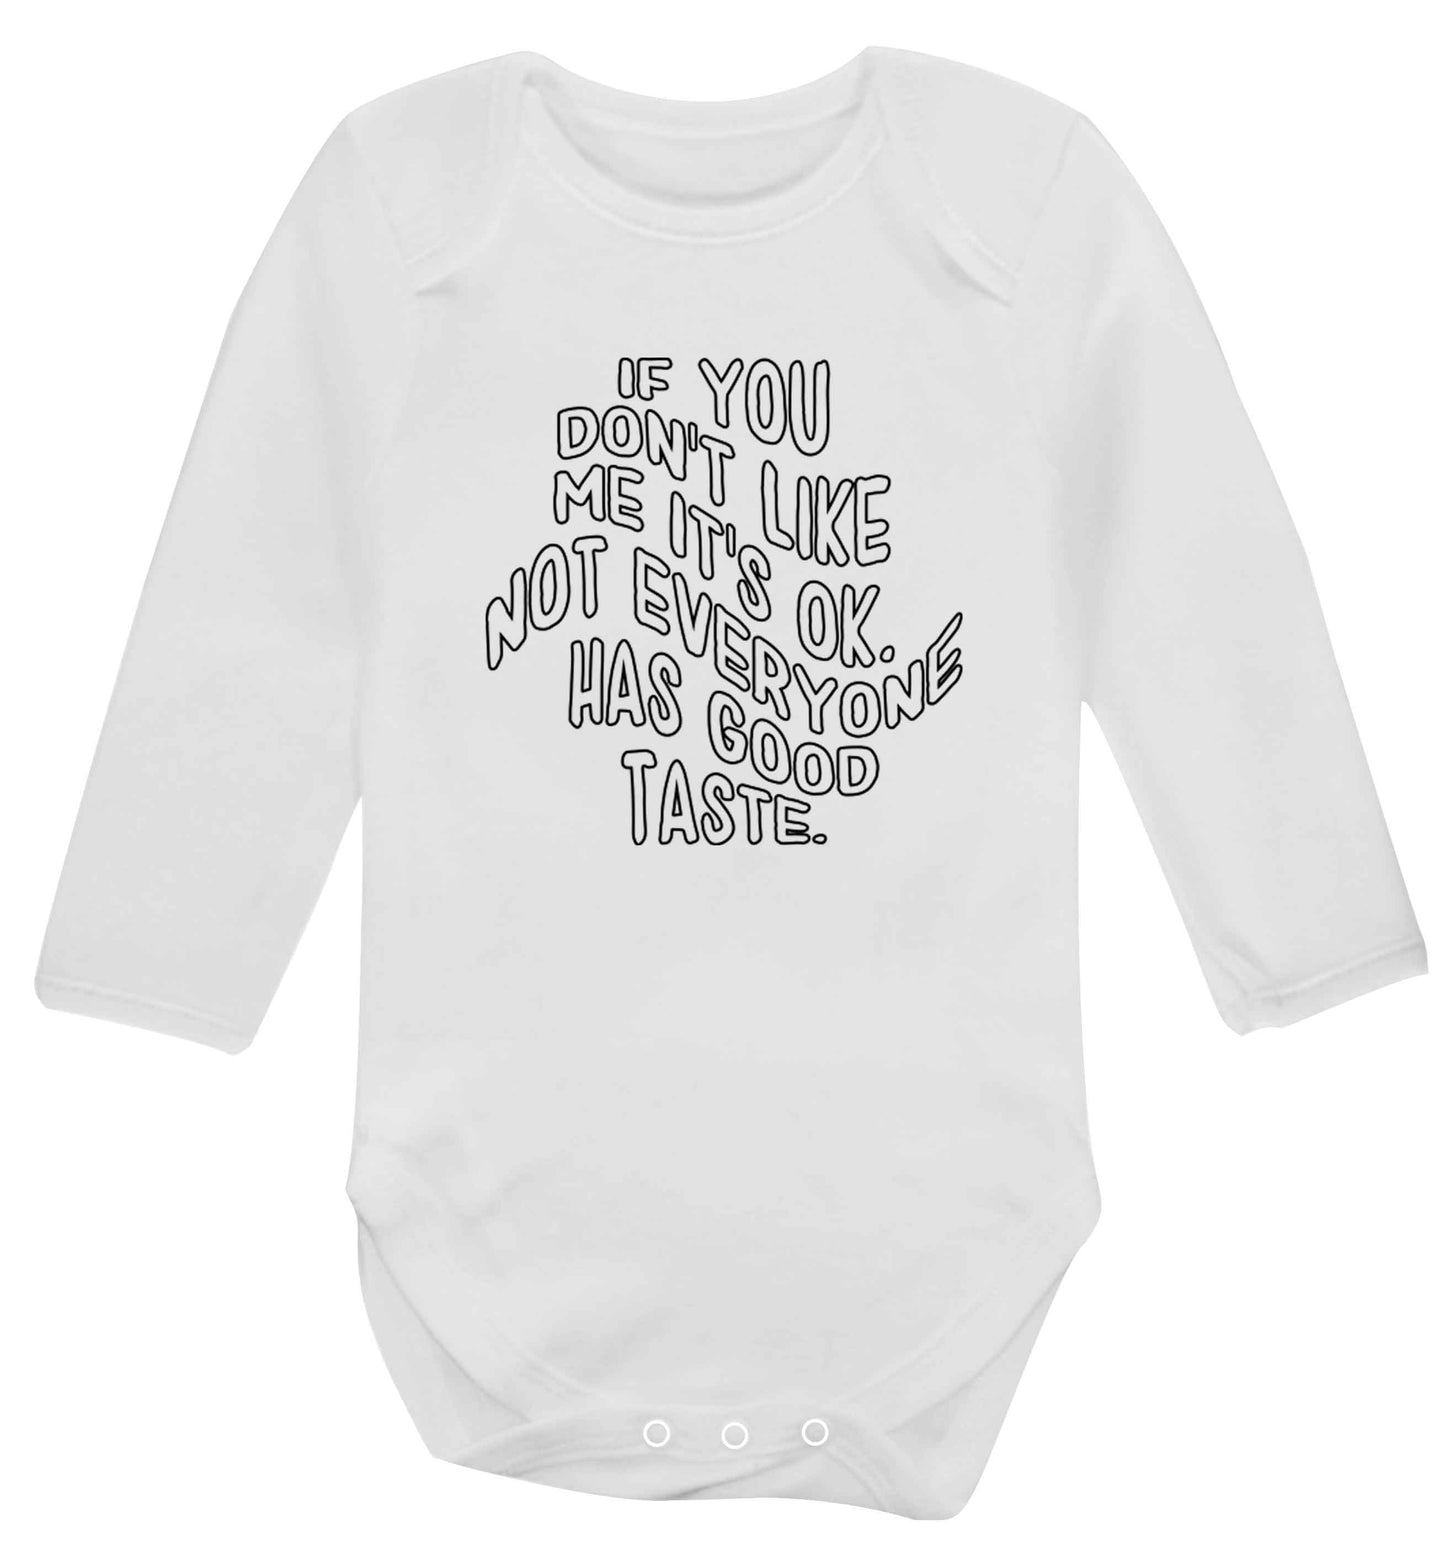 If you don't like me it's ok not everyone has good taste baby vest long sleeved white 6-12 months